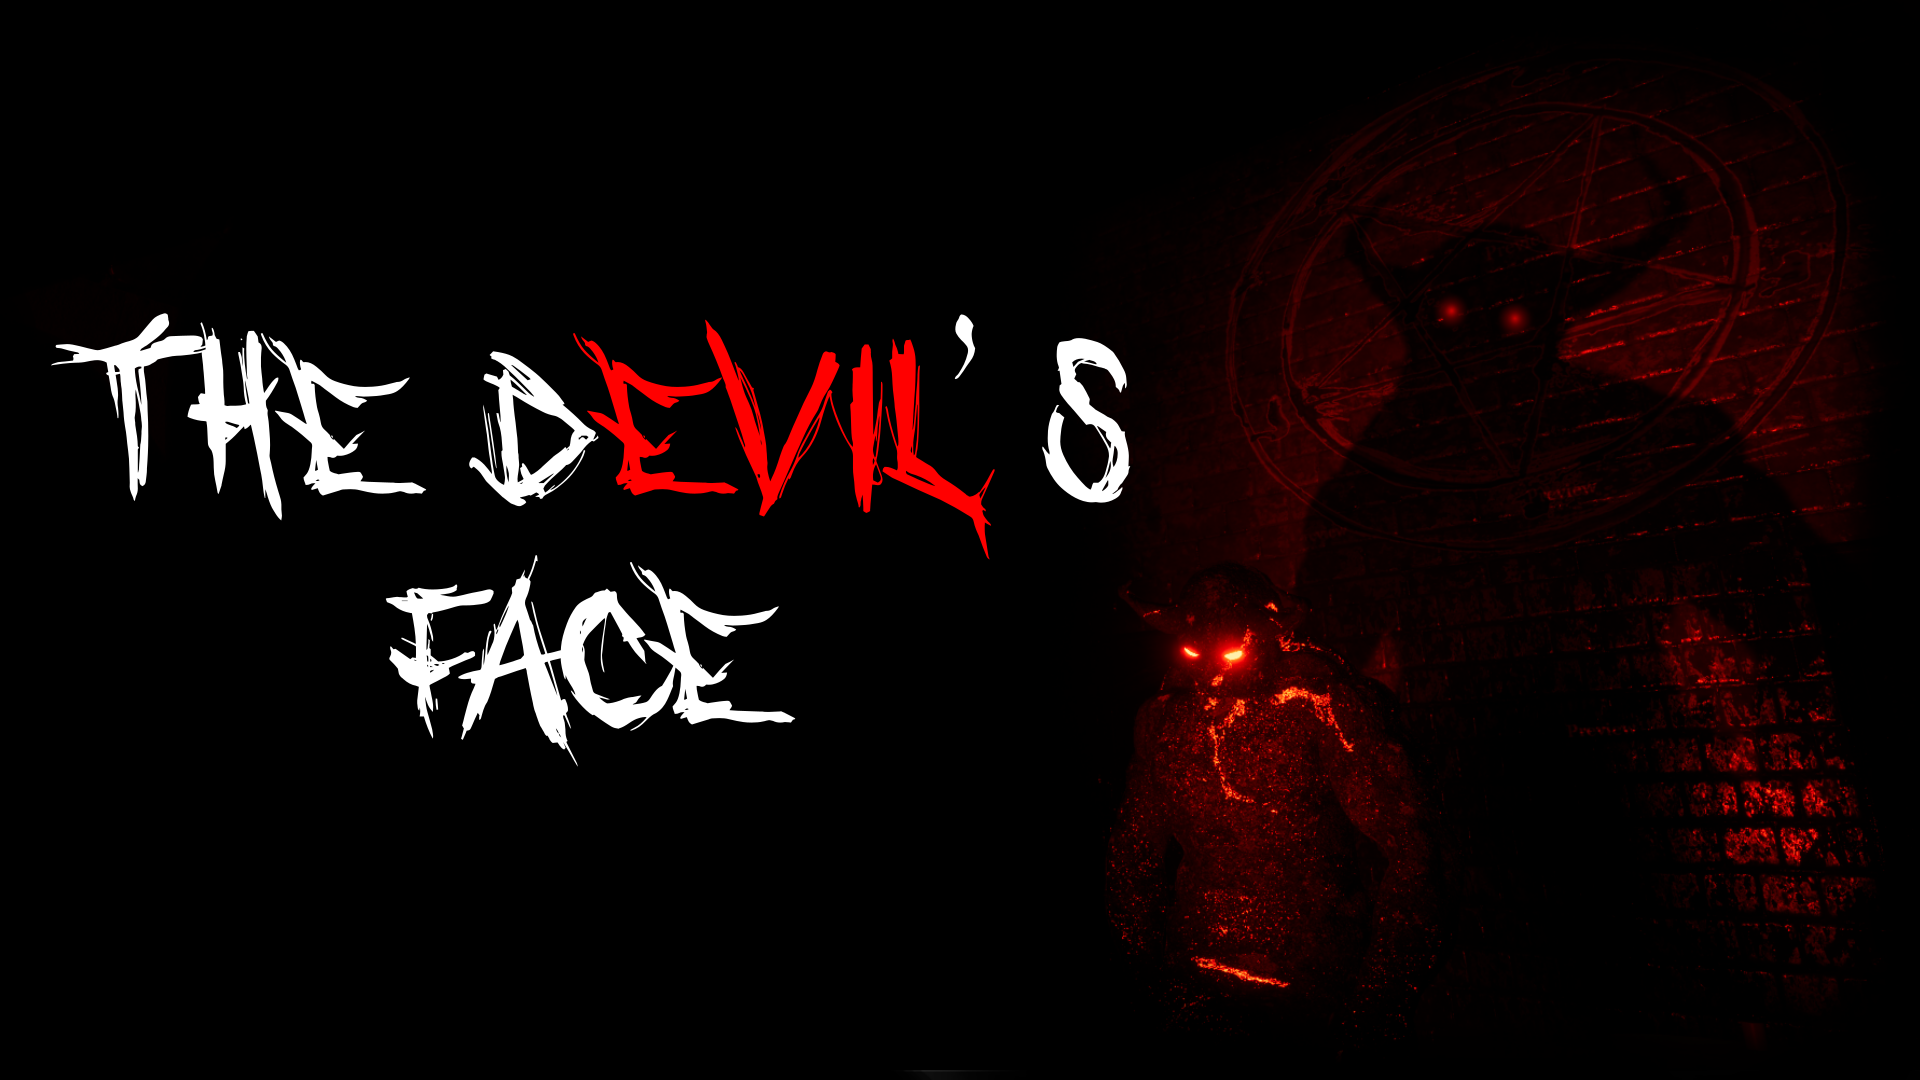 Exciting New Update for “The Devil’s Face”!